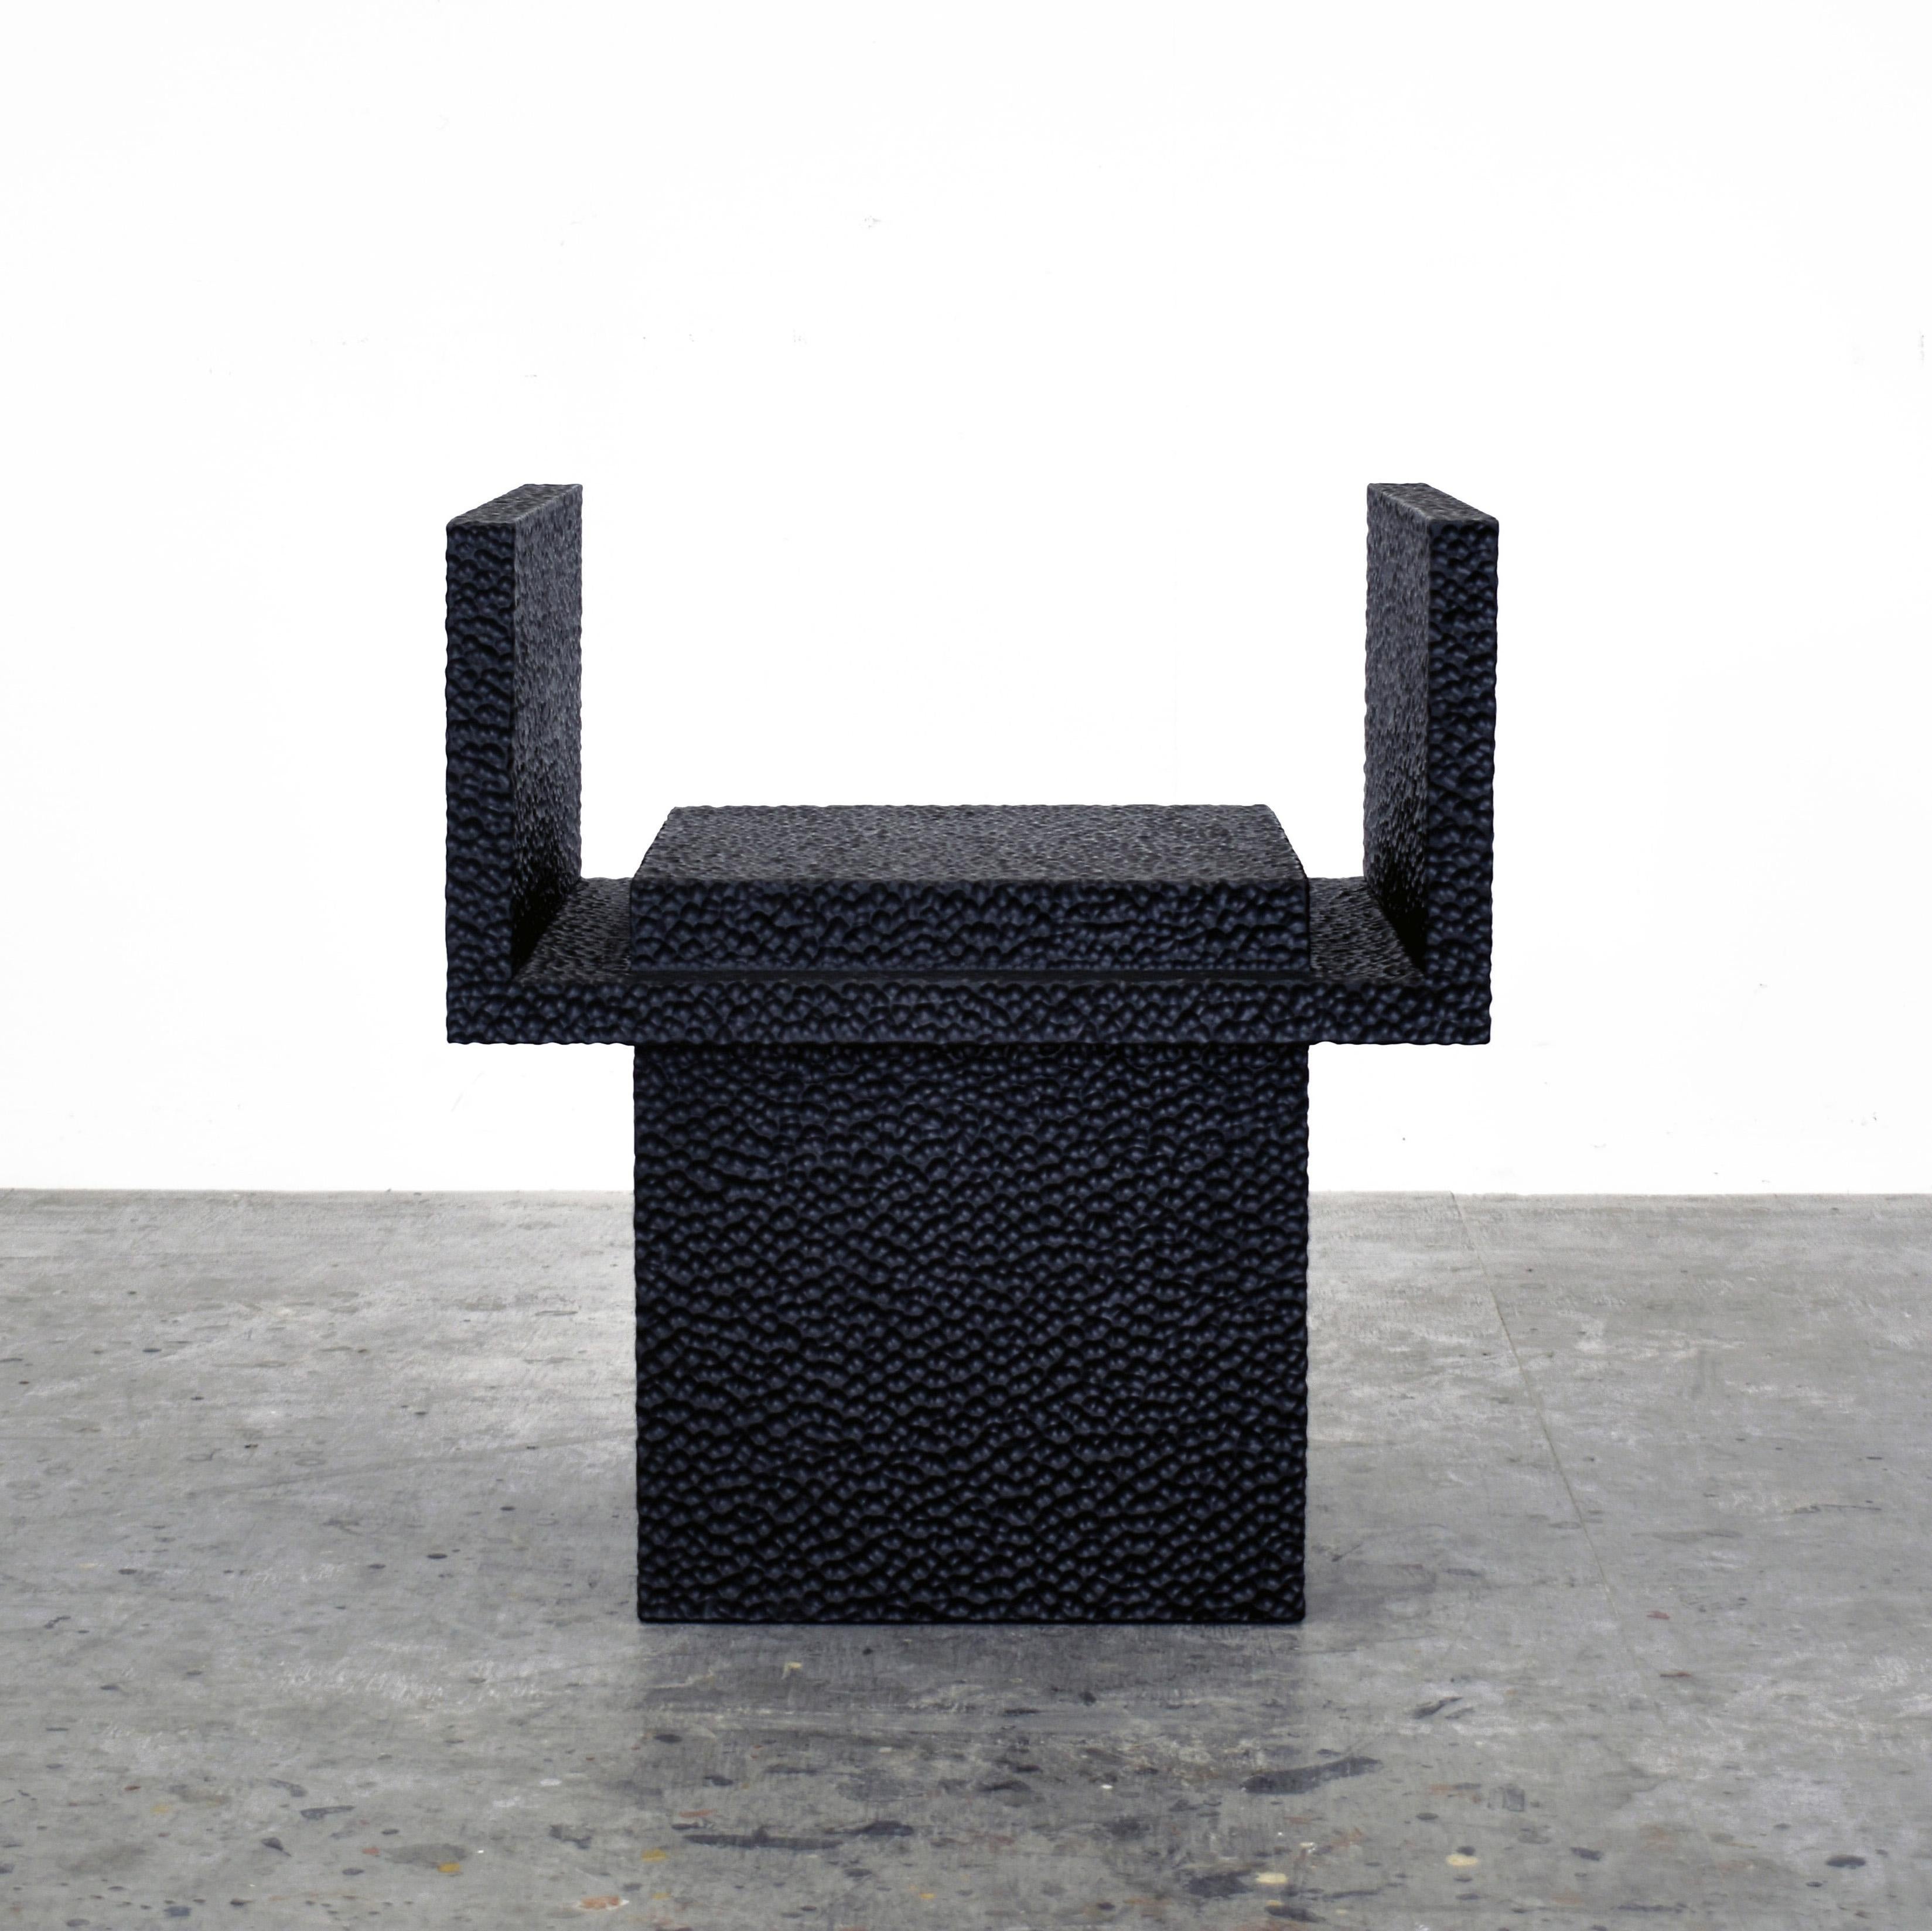 C4 chair by John Eric Byers
Dimensions: 63.5 x 58.5 x 45.7 cm
Materials: Carved blackened maple

All works are individually handmade to order.

John Eric Byers creates geometrically inspired pieces that are minimal, emotional, and modernly